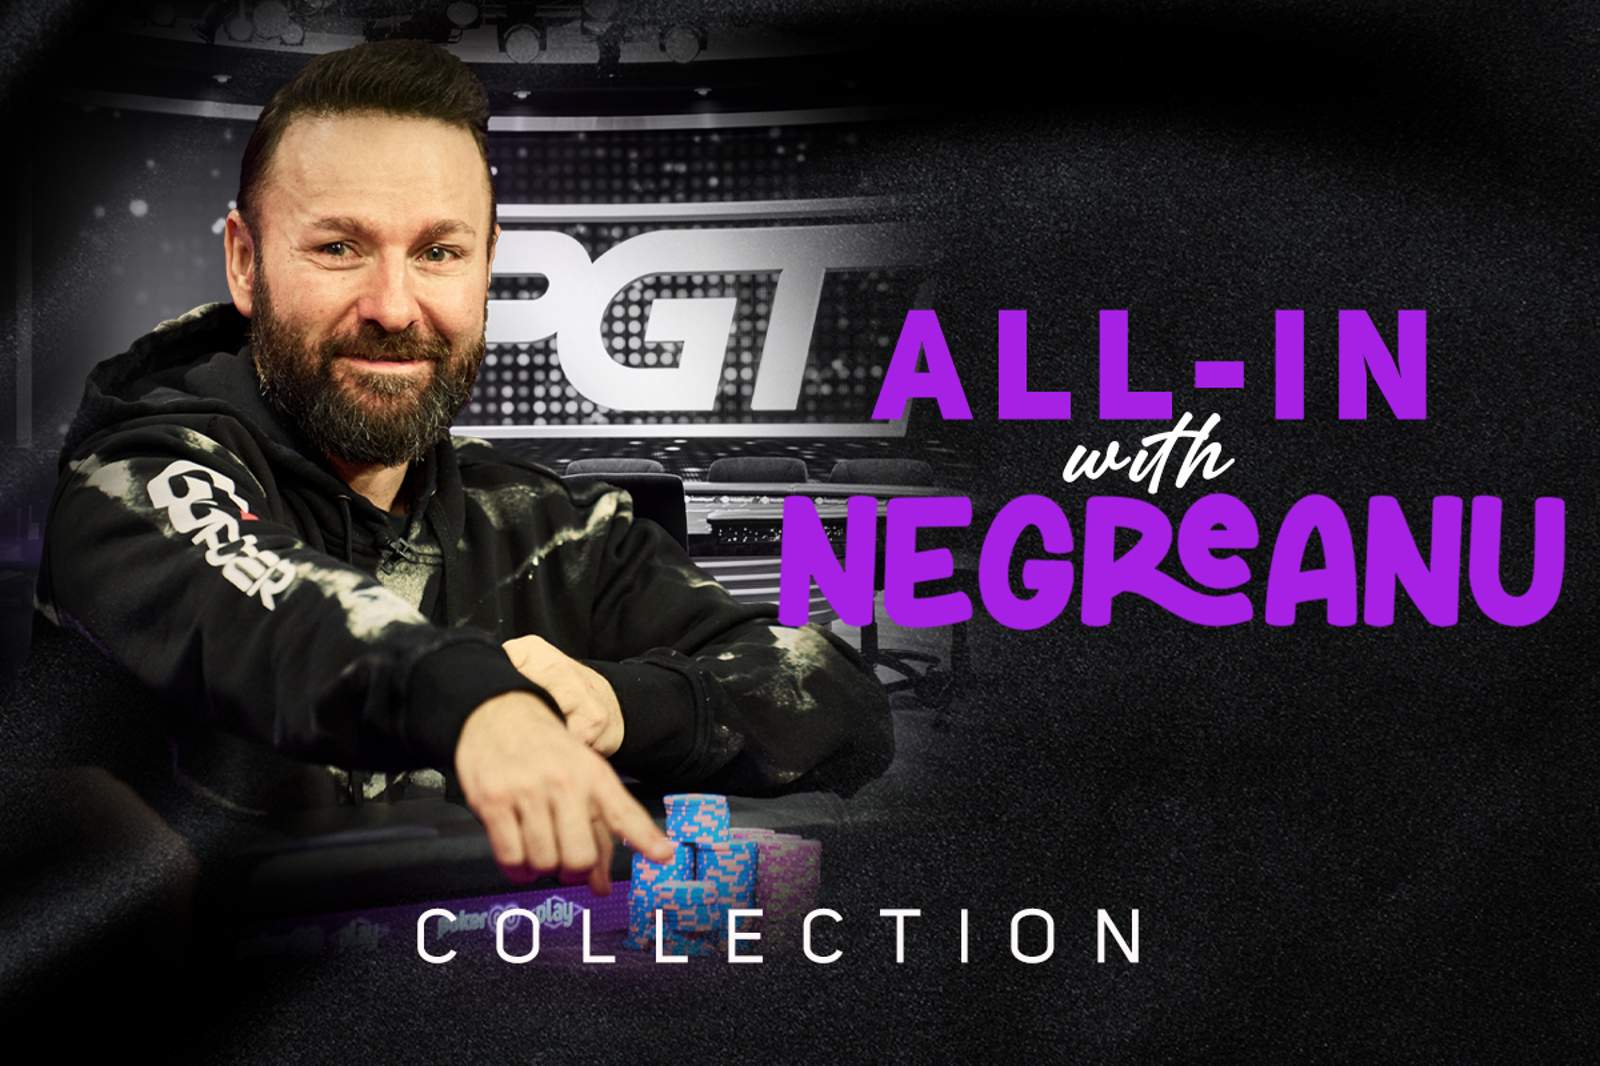 New 'All-In with Daniel Negreanu' Collection Added to PokerGO